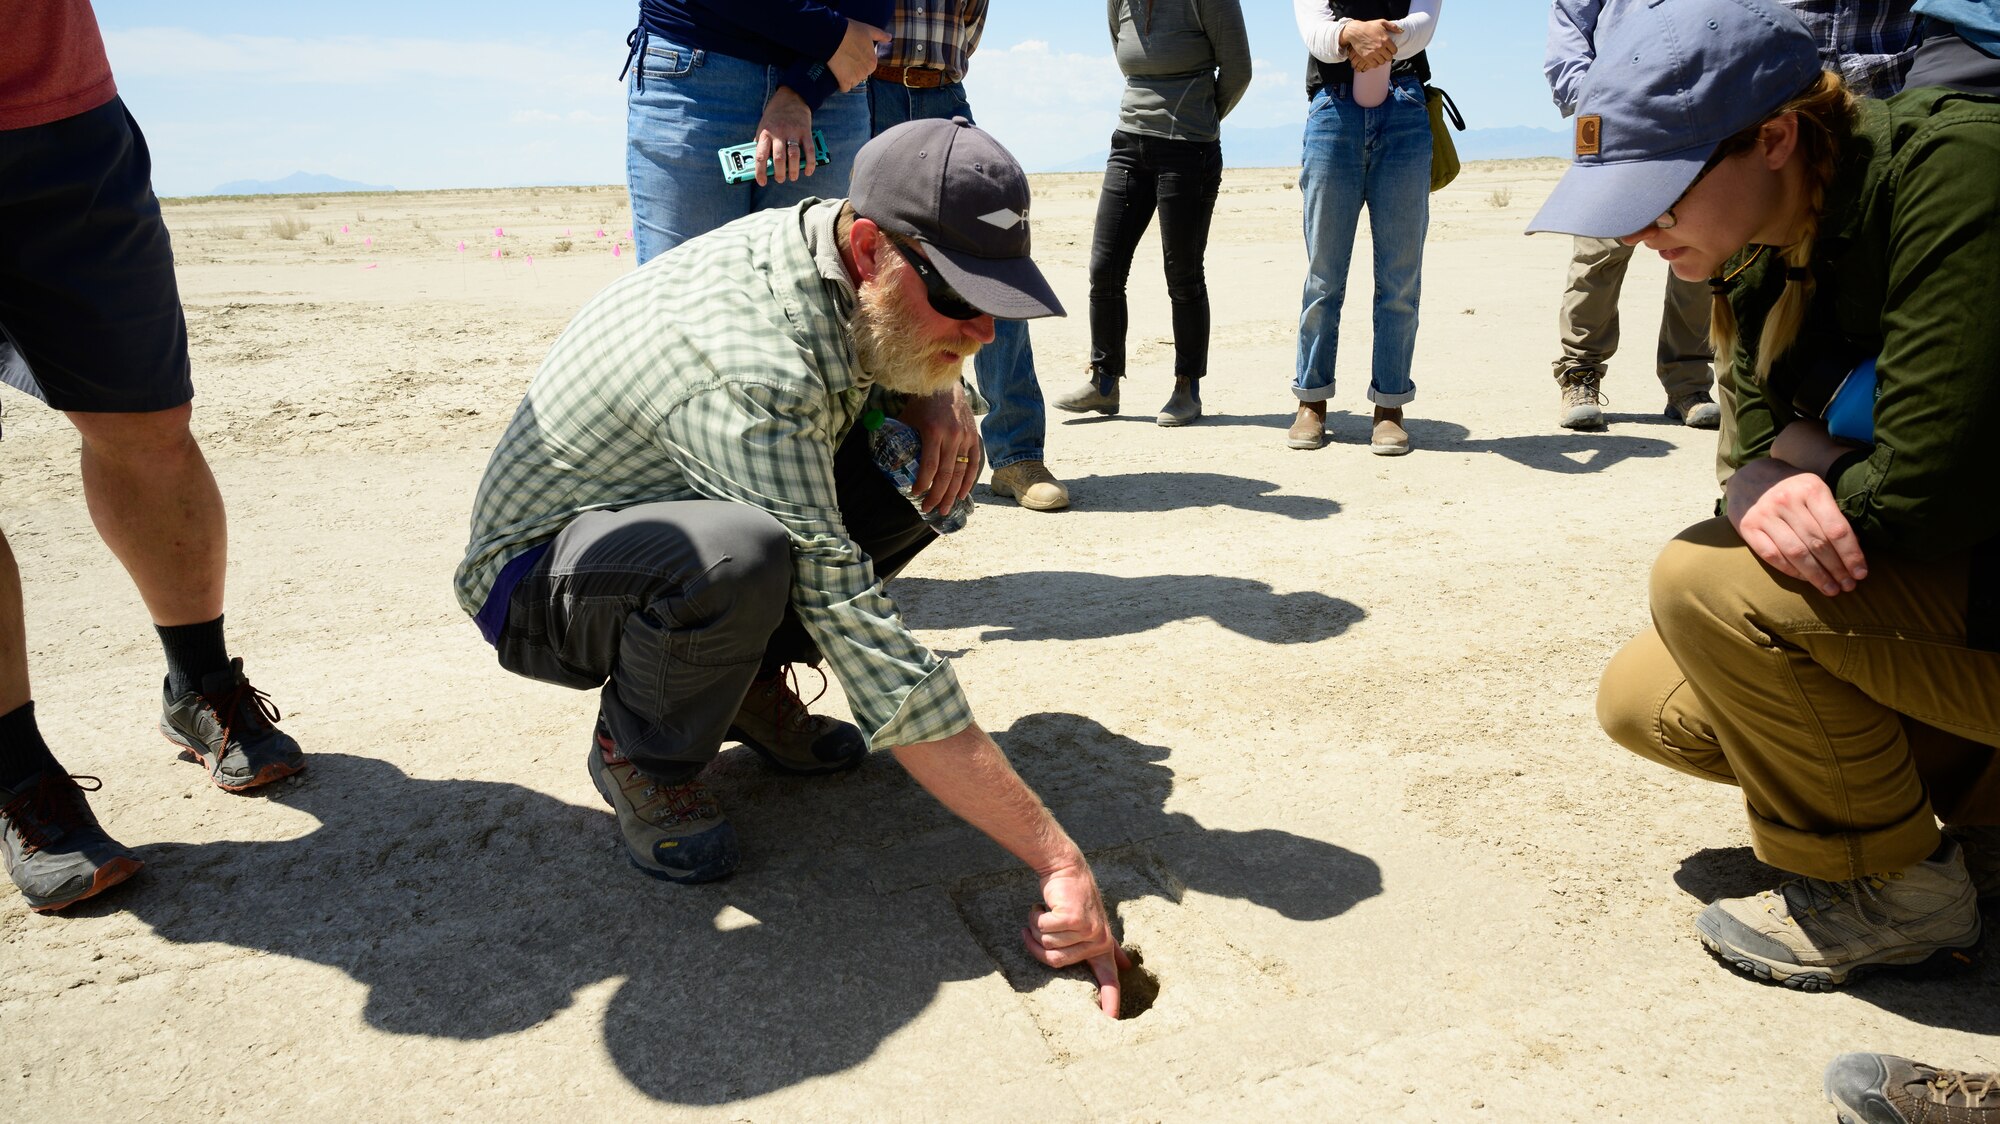 A footprint appears on an archaeological site as Daron Duke and others look on in the background.